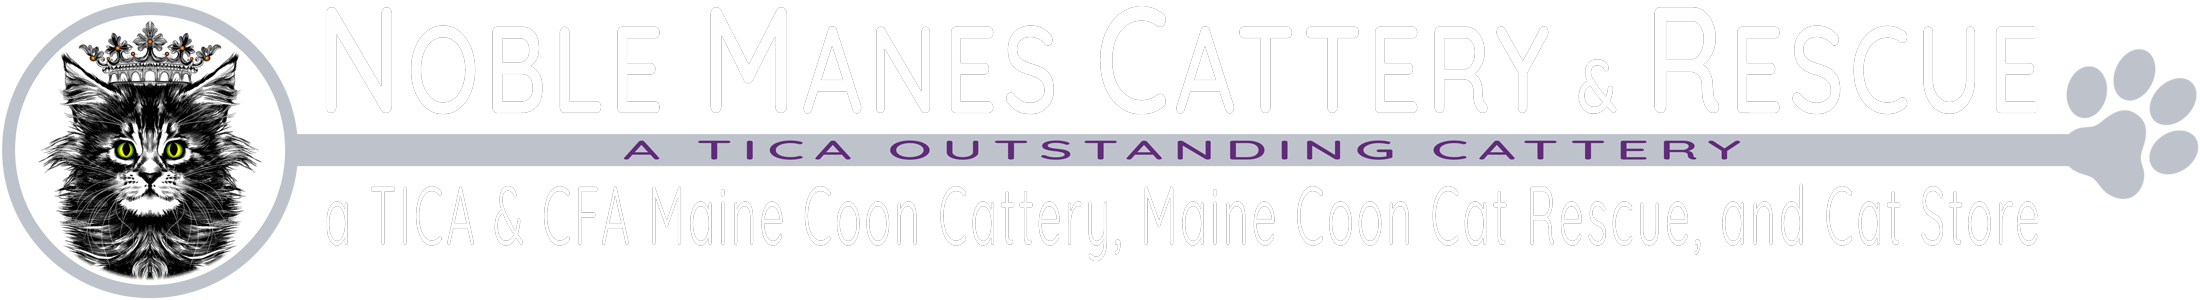 Noble Manes Cattery